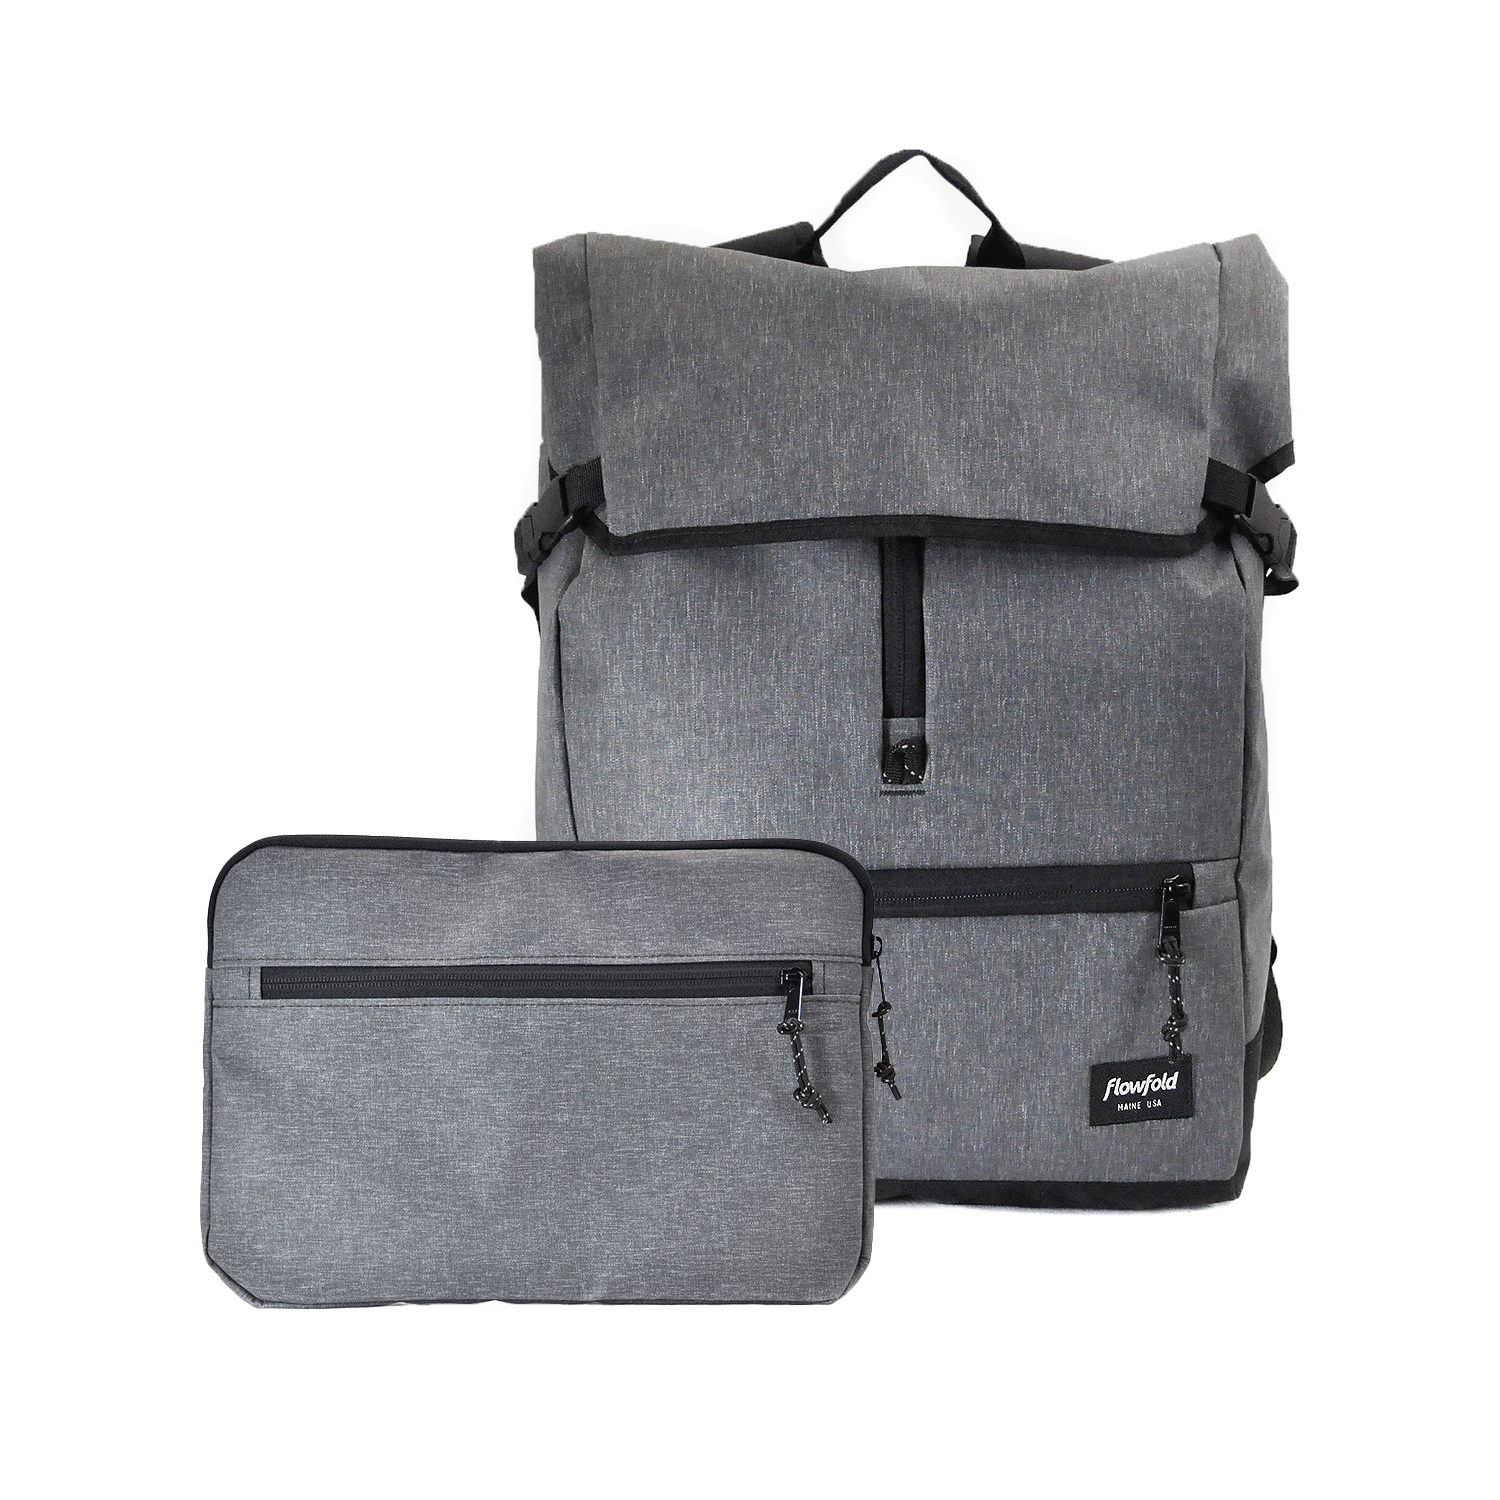 Rockland Kit: Commuter Backpack + Laptop Case for travel, commutes, and weather-resistant adventures - Recycled Heather Grey